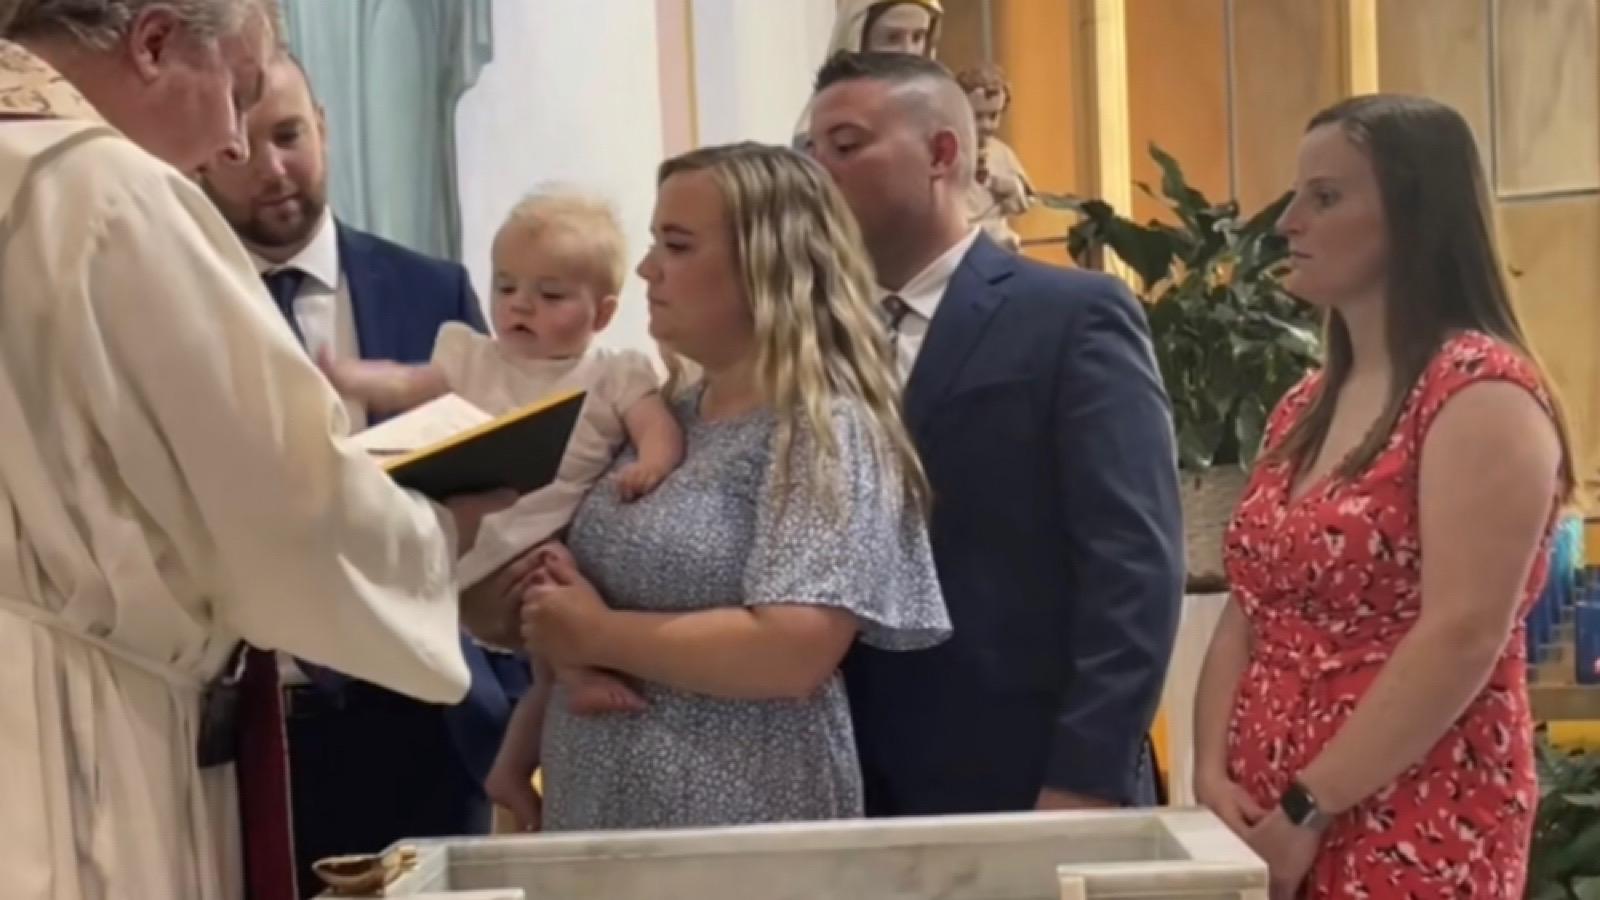 A mom and her baby go viral for a hilarious baptism moment.